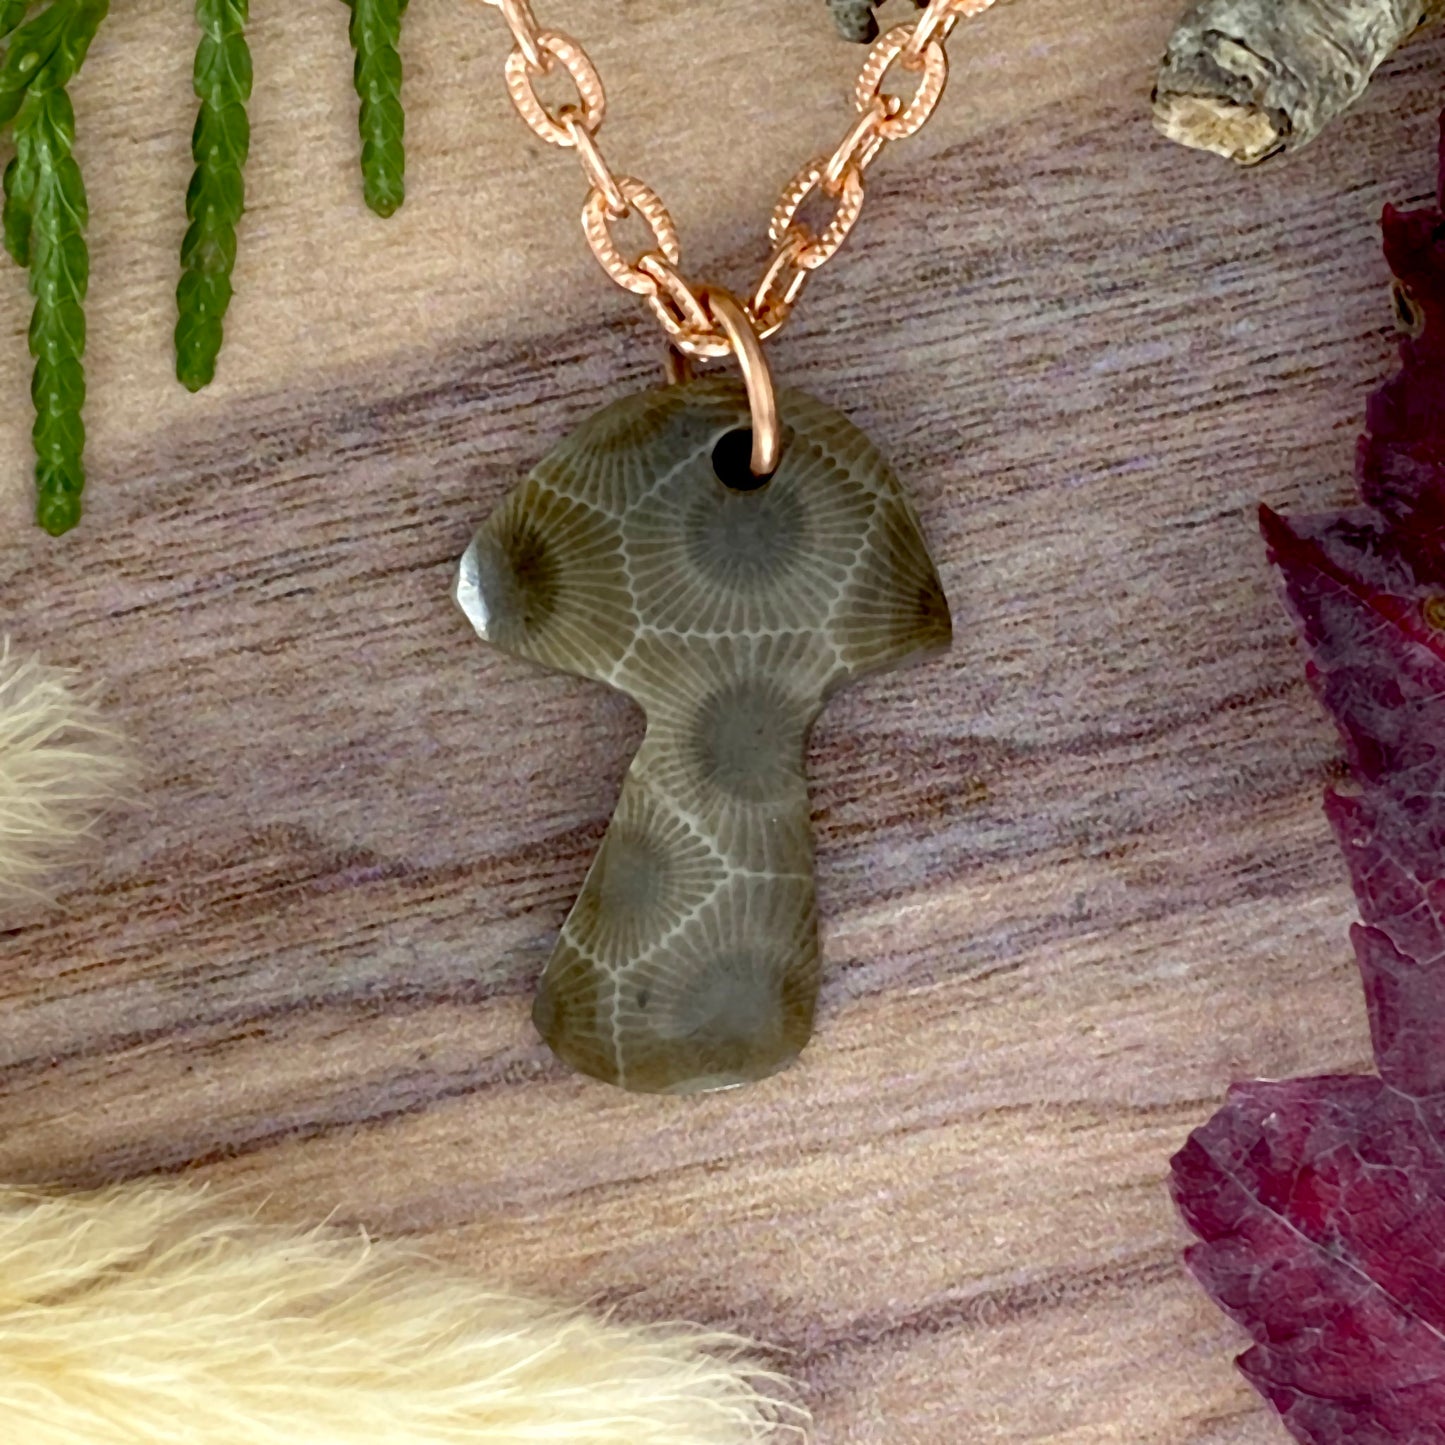 Petoskey Stone Mushroom Pendant Necklace Front View - Stone Treasures by the Lake